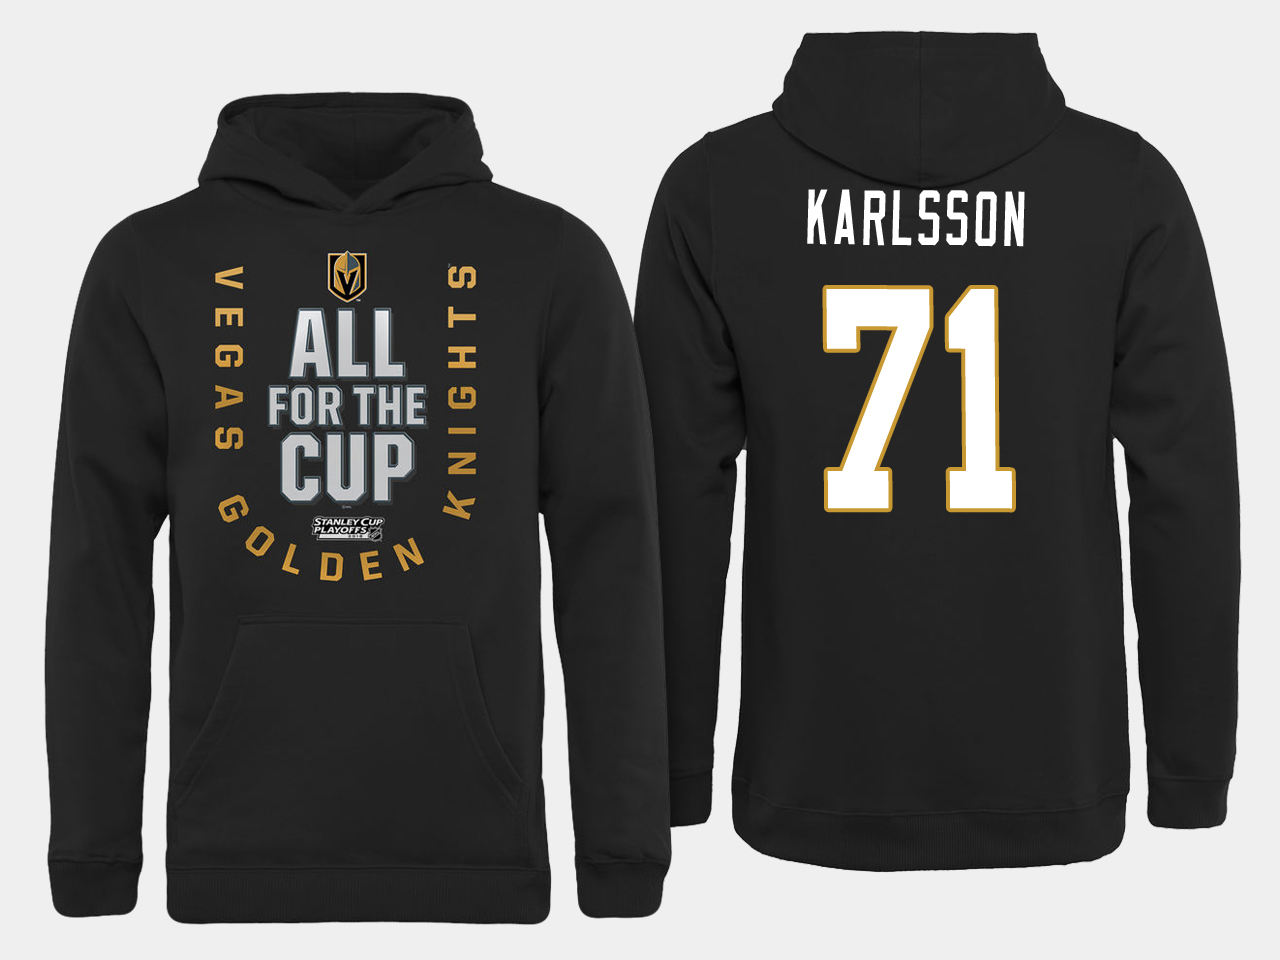 Men NHL Vegas Golden Knights #71 Karlsson All for the Cup hoodie->more nhl jerseys->NHL Jersey